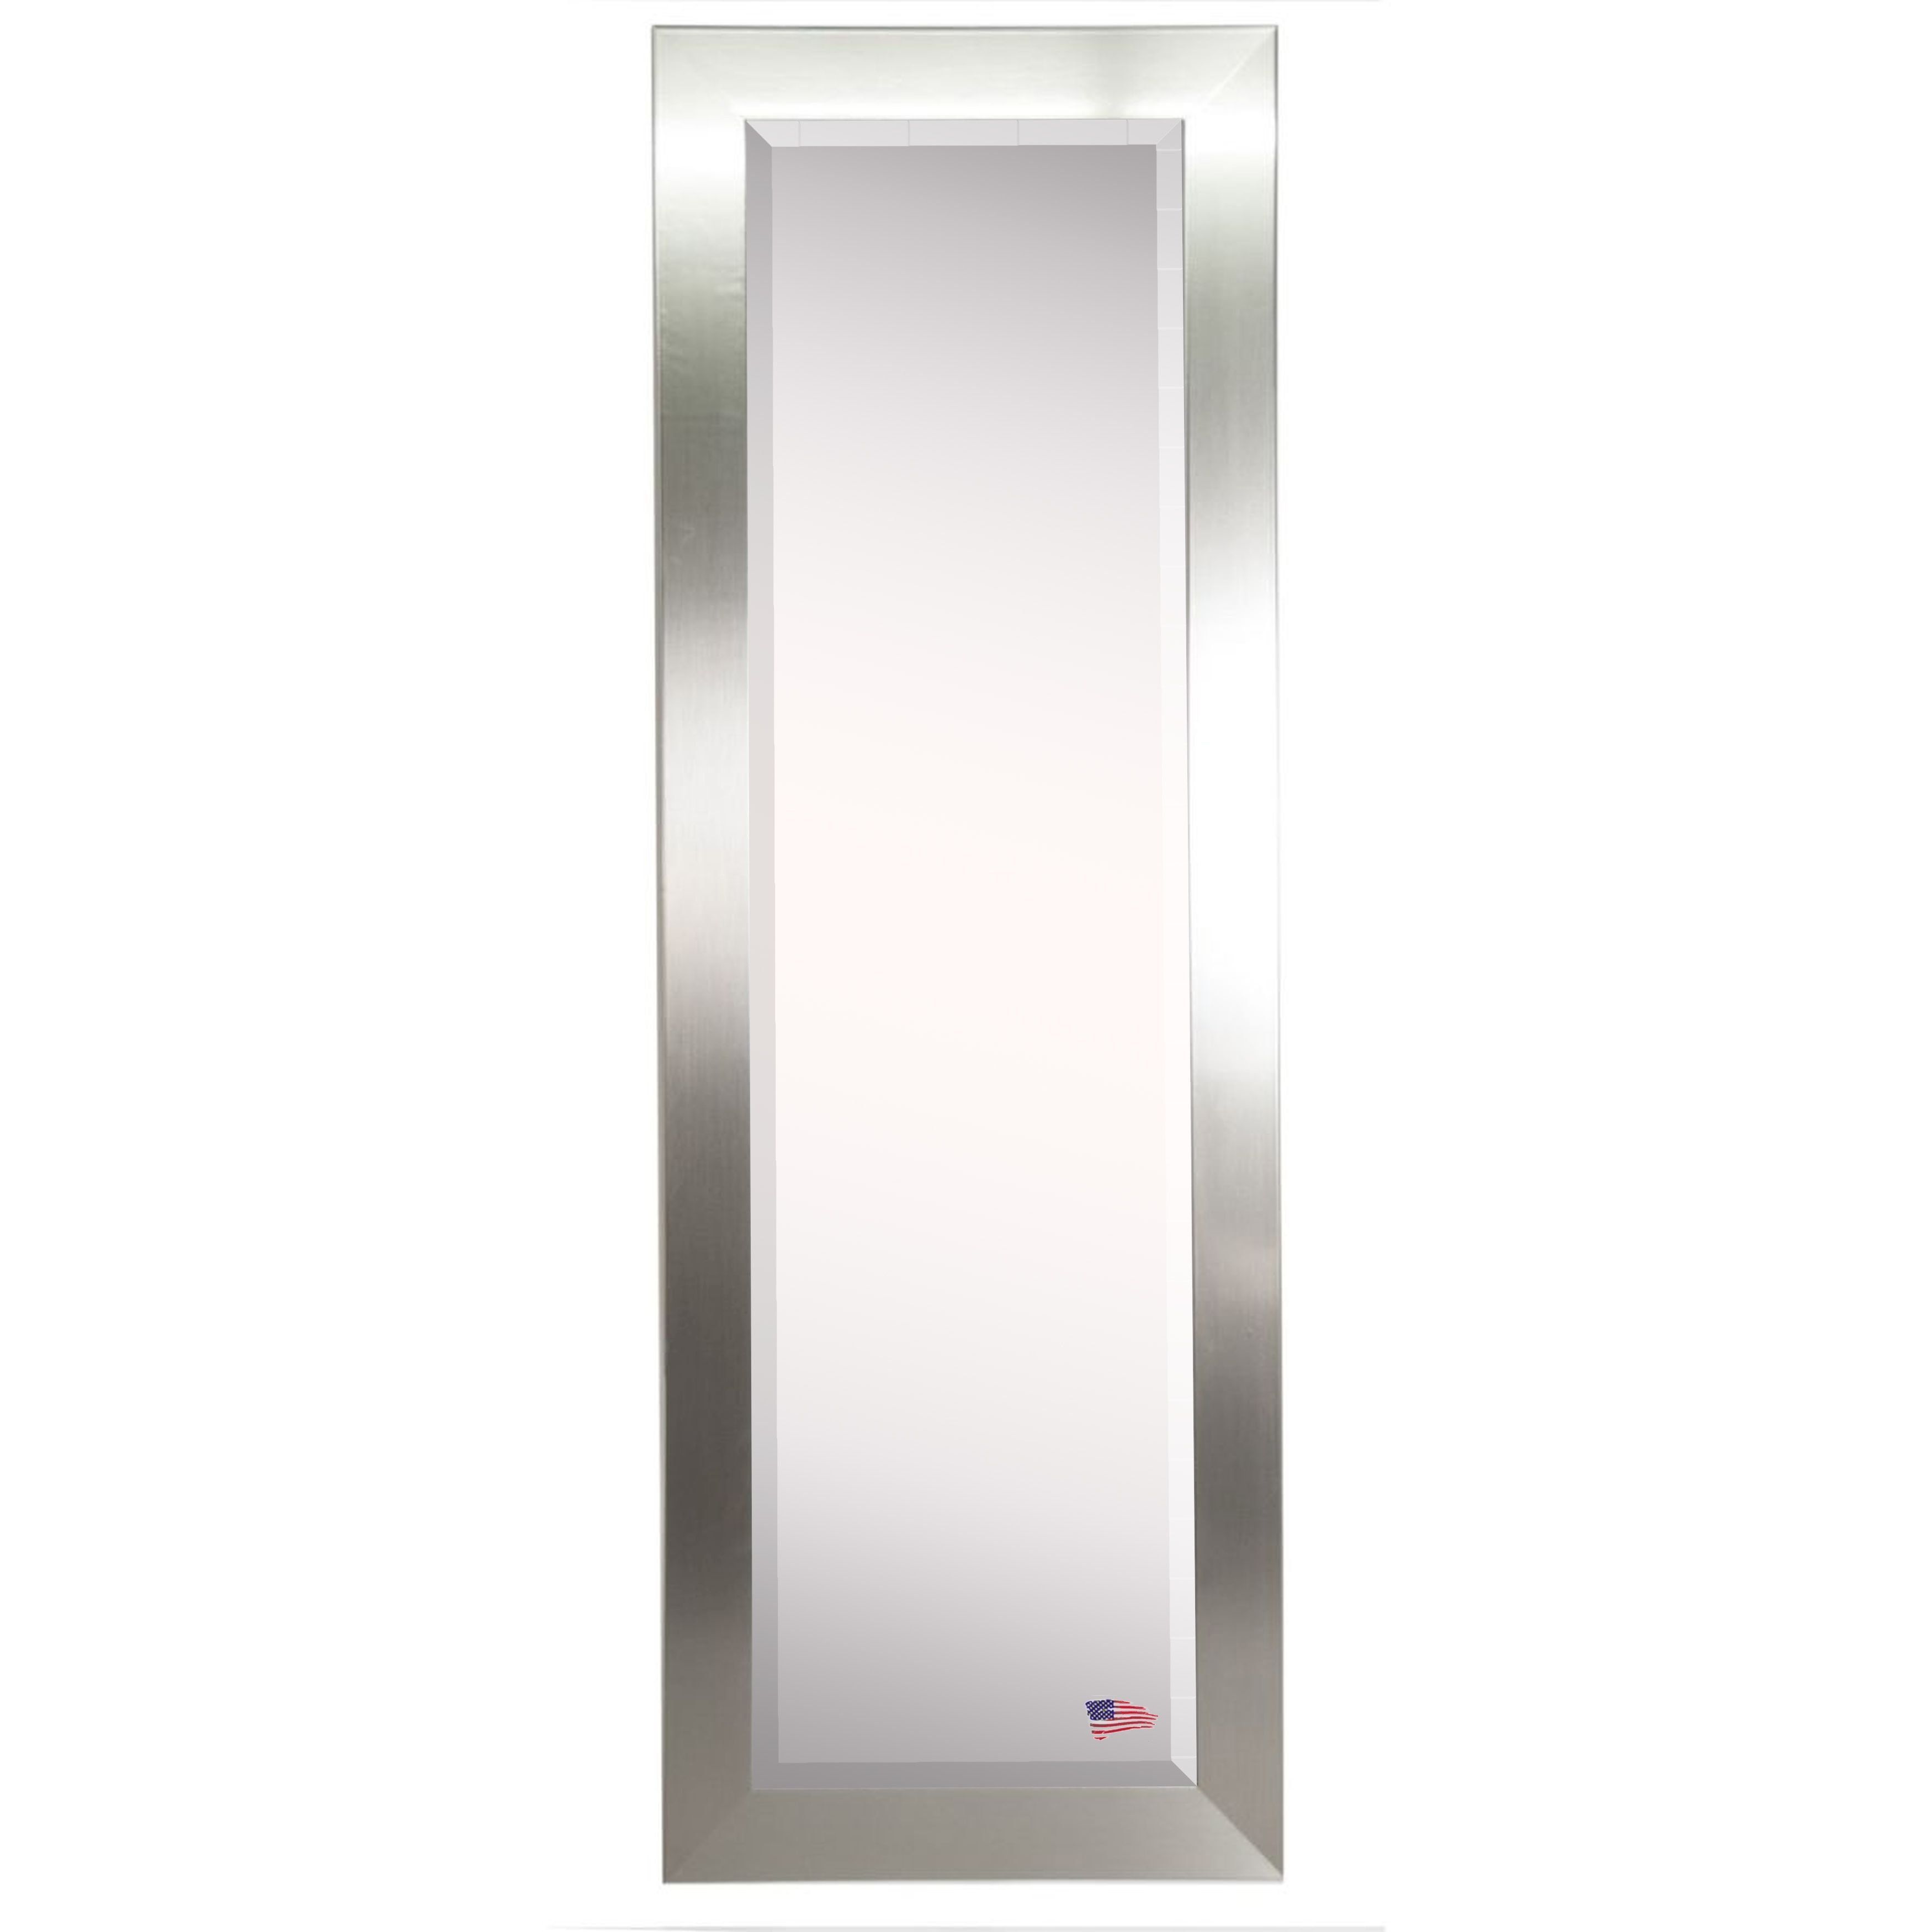 Dalessio Wide Modern Contemporary Full Length Beveled Body Dresser Mirror With Regard To Dalessio Wide Tall Full Length Mirrors (View 8 of 20)